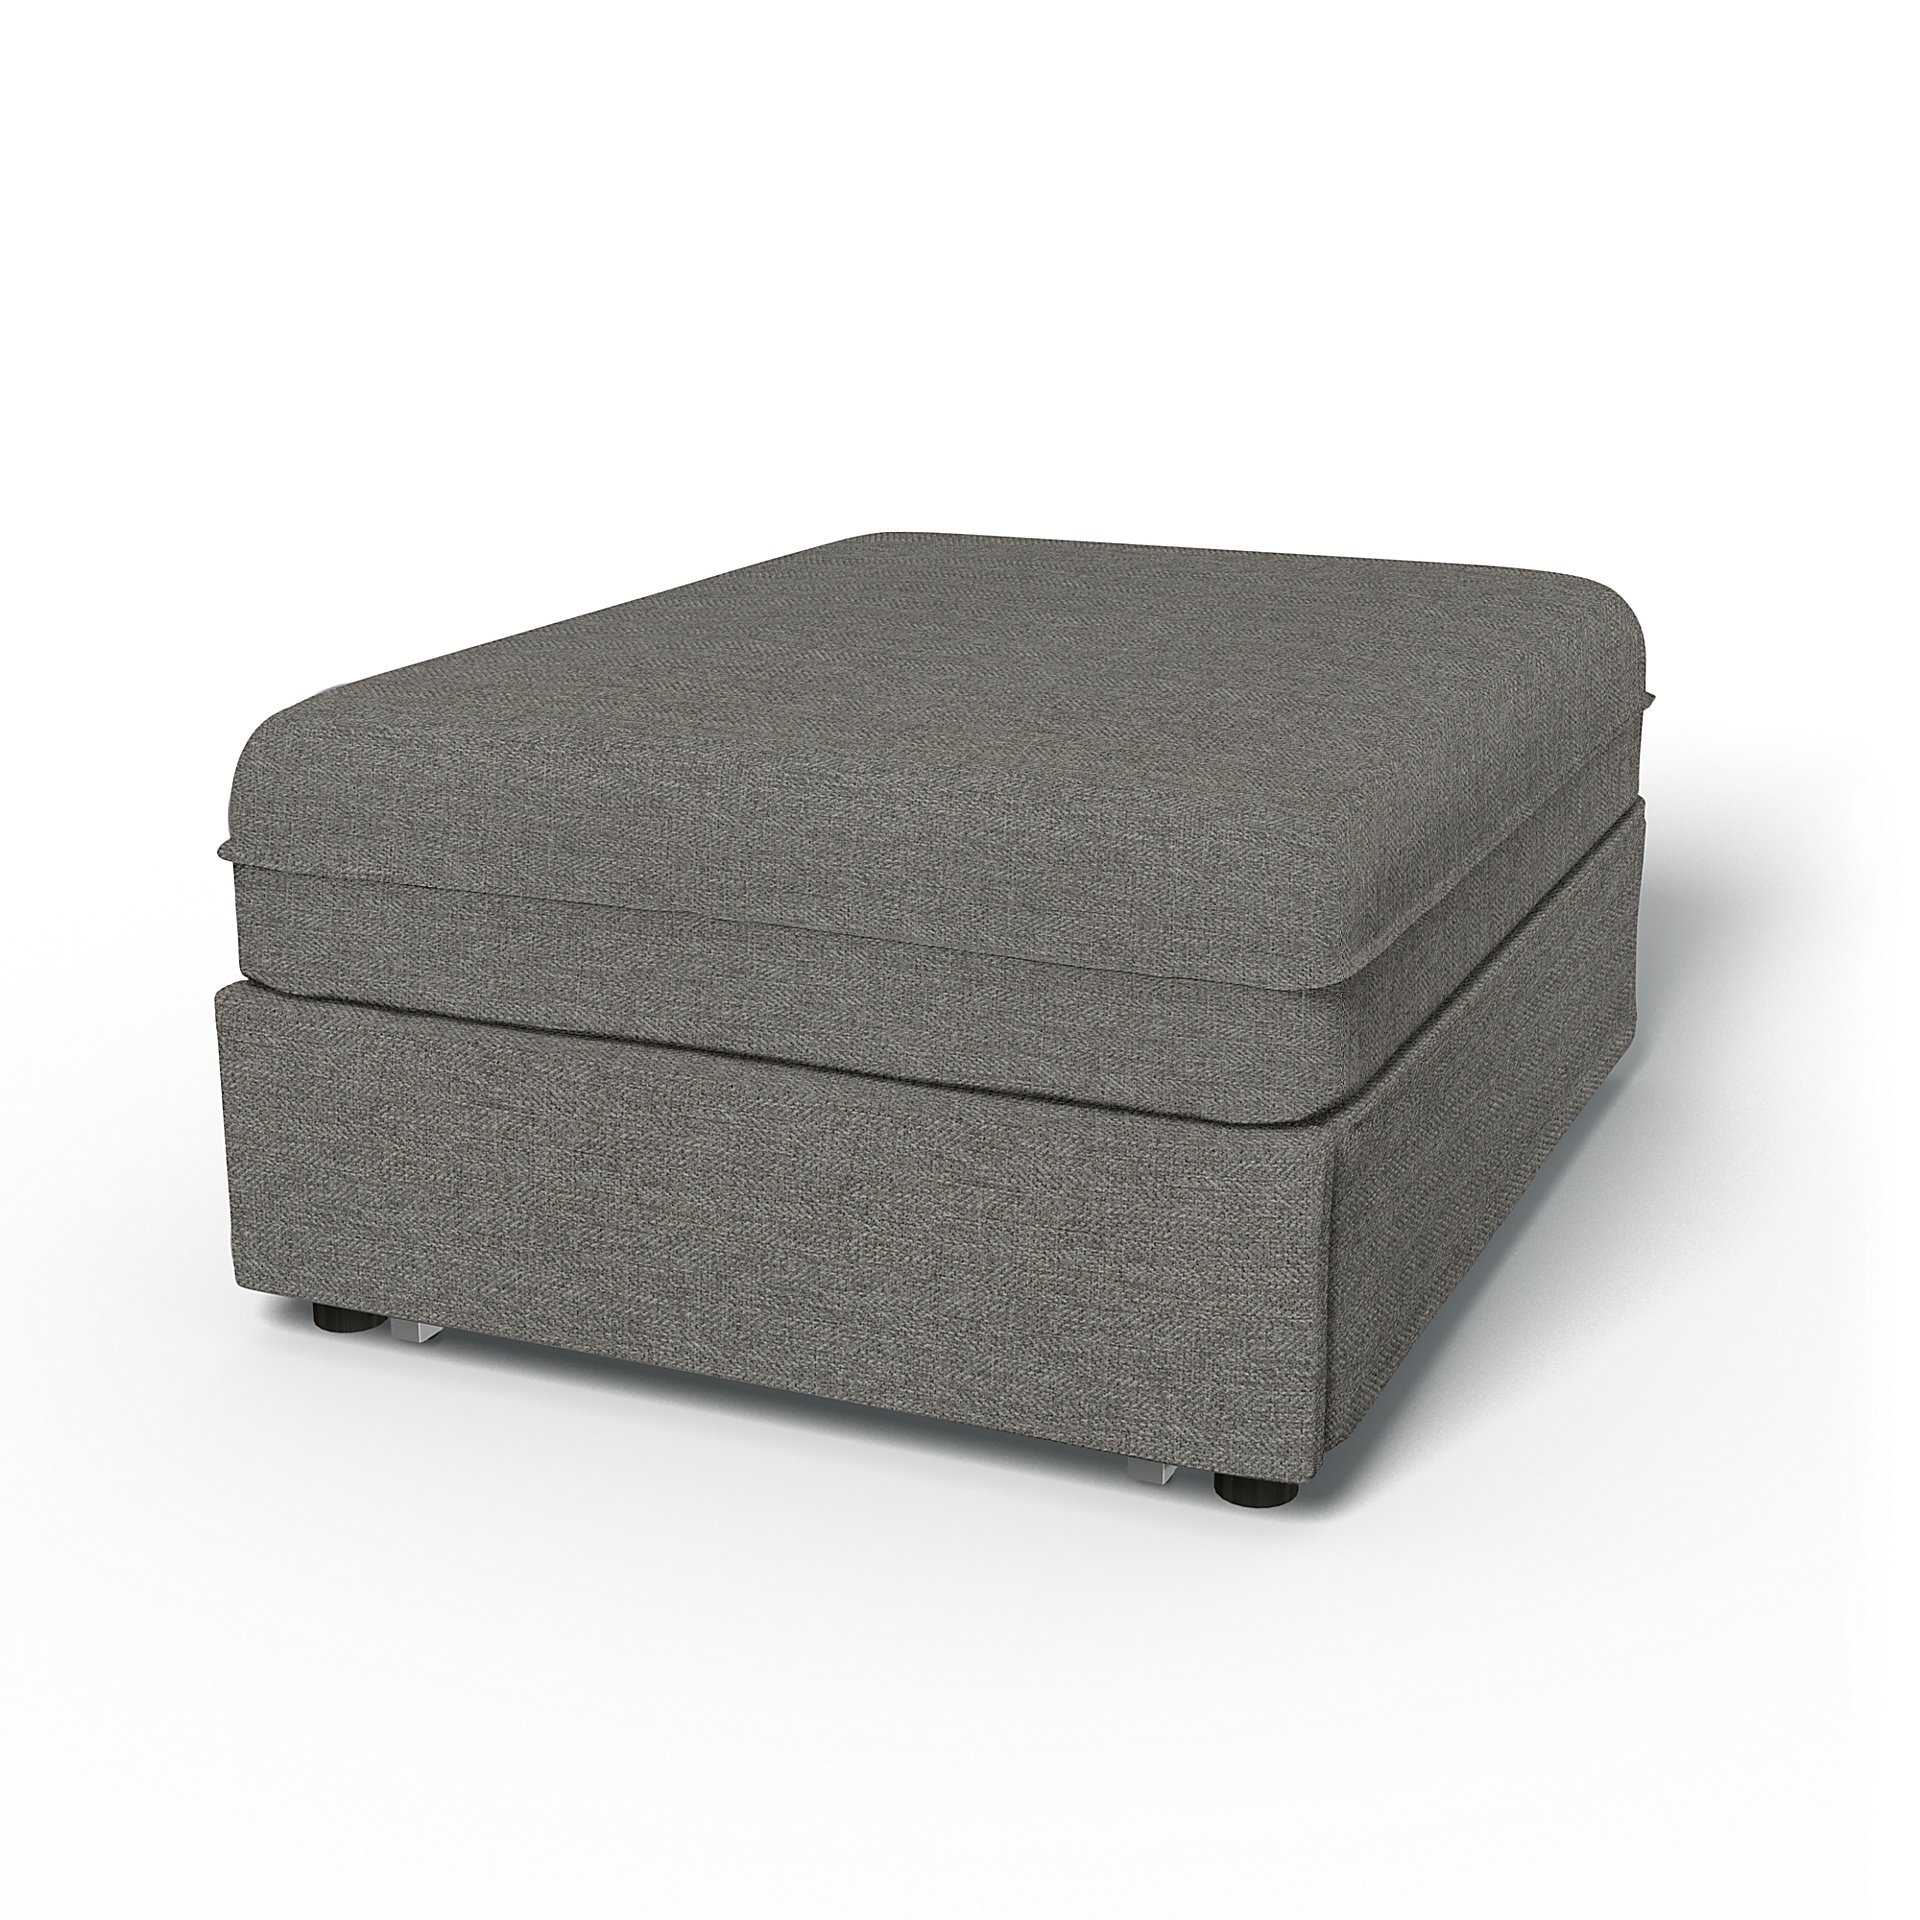 IKEA - Vallentuna Seat Module with Sofa Bed Cover 80x100cm 32x39in, Taupe, Boucle & Texture - Bemz